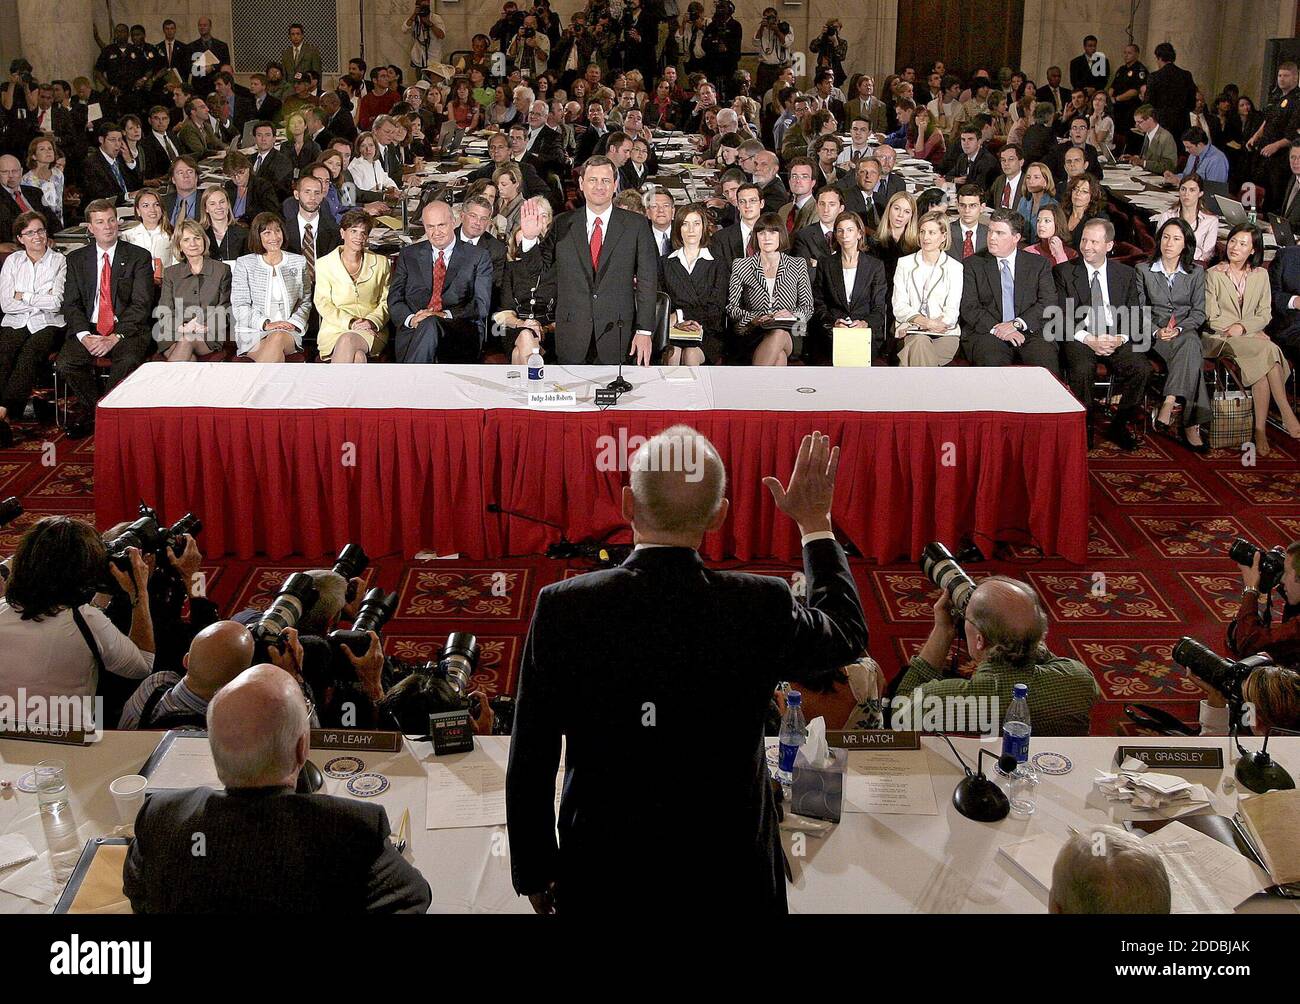 NO FILM, NO VIDEO, NO TV, NO DOCUMENTARY - John Roberts, nominee for Supreme Court Chief Justice of the United States, is sworn in by Sen. Arlen Specter before the Senate Judiciary Committee on Capitol Hill in Washington, DC, USA, on September 12, 2005. The Senate began week-long confirmation hearings on the nomination of star jurist Roberts to be the next US Supreme Court chief justice, Pesident George W. Bush's first shot at reshaping the high court to reflect his conservative views, following the death of William Rehnquist 03 September. Photo by Chuck Kennedy/KRT/ABACAPRESS.COM Stock Photo